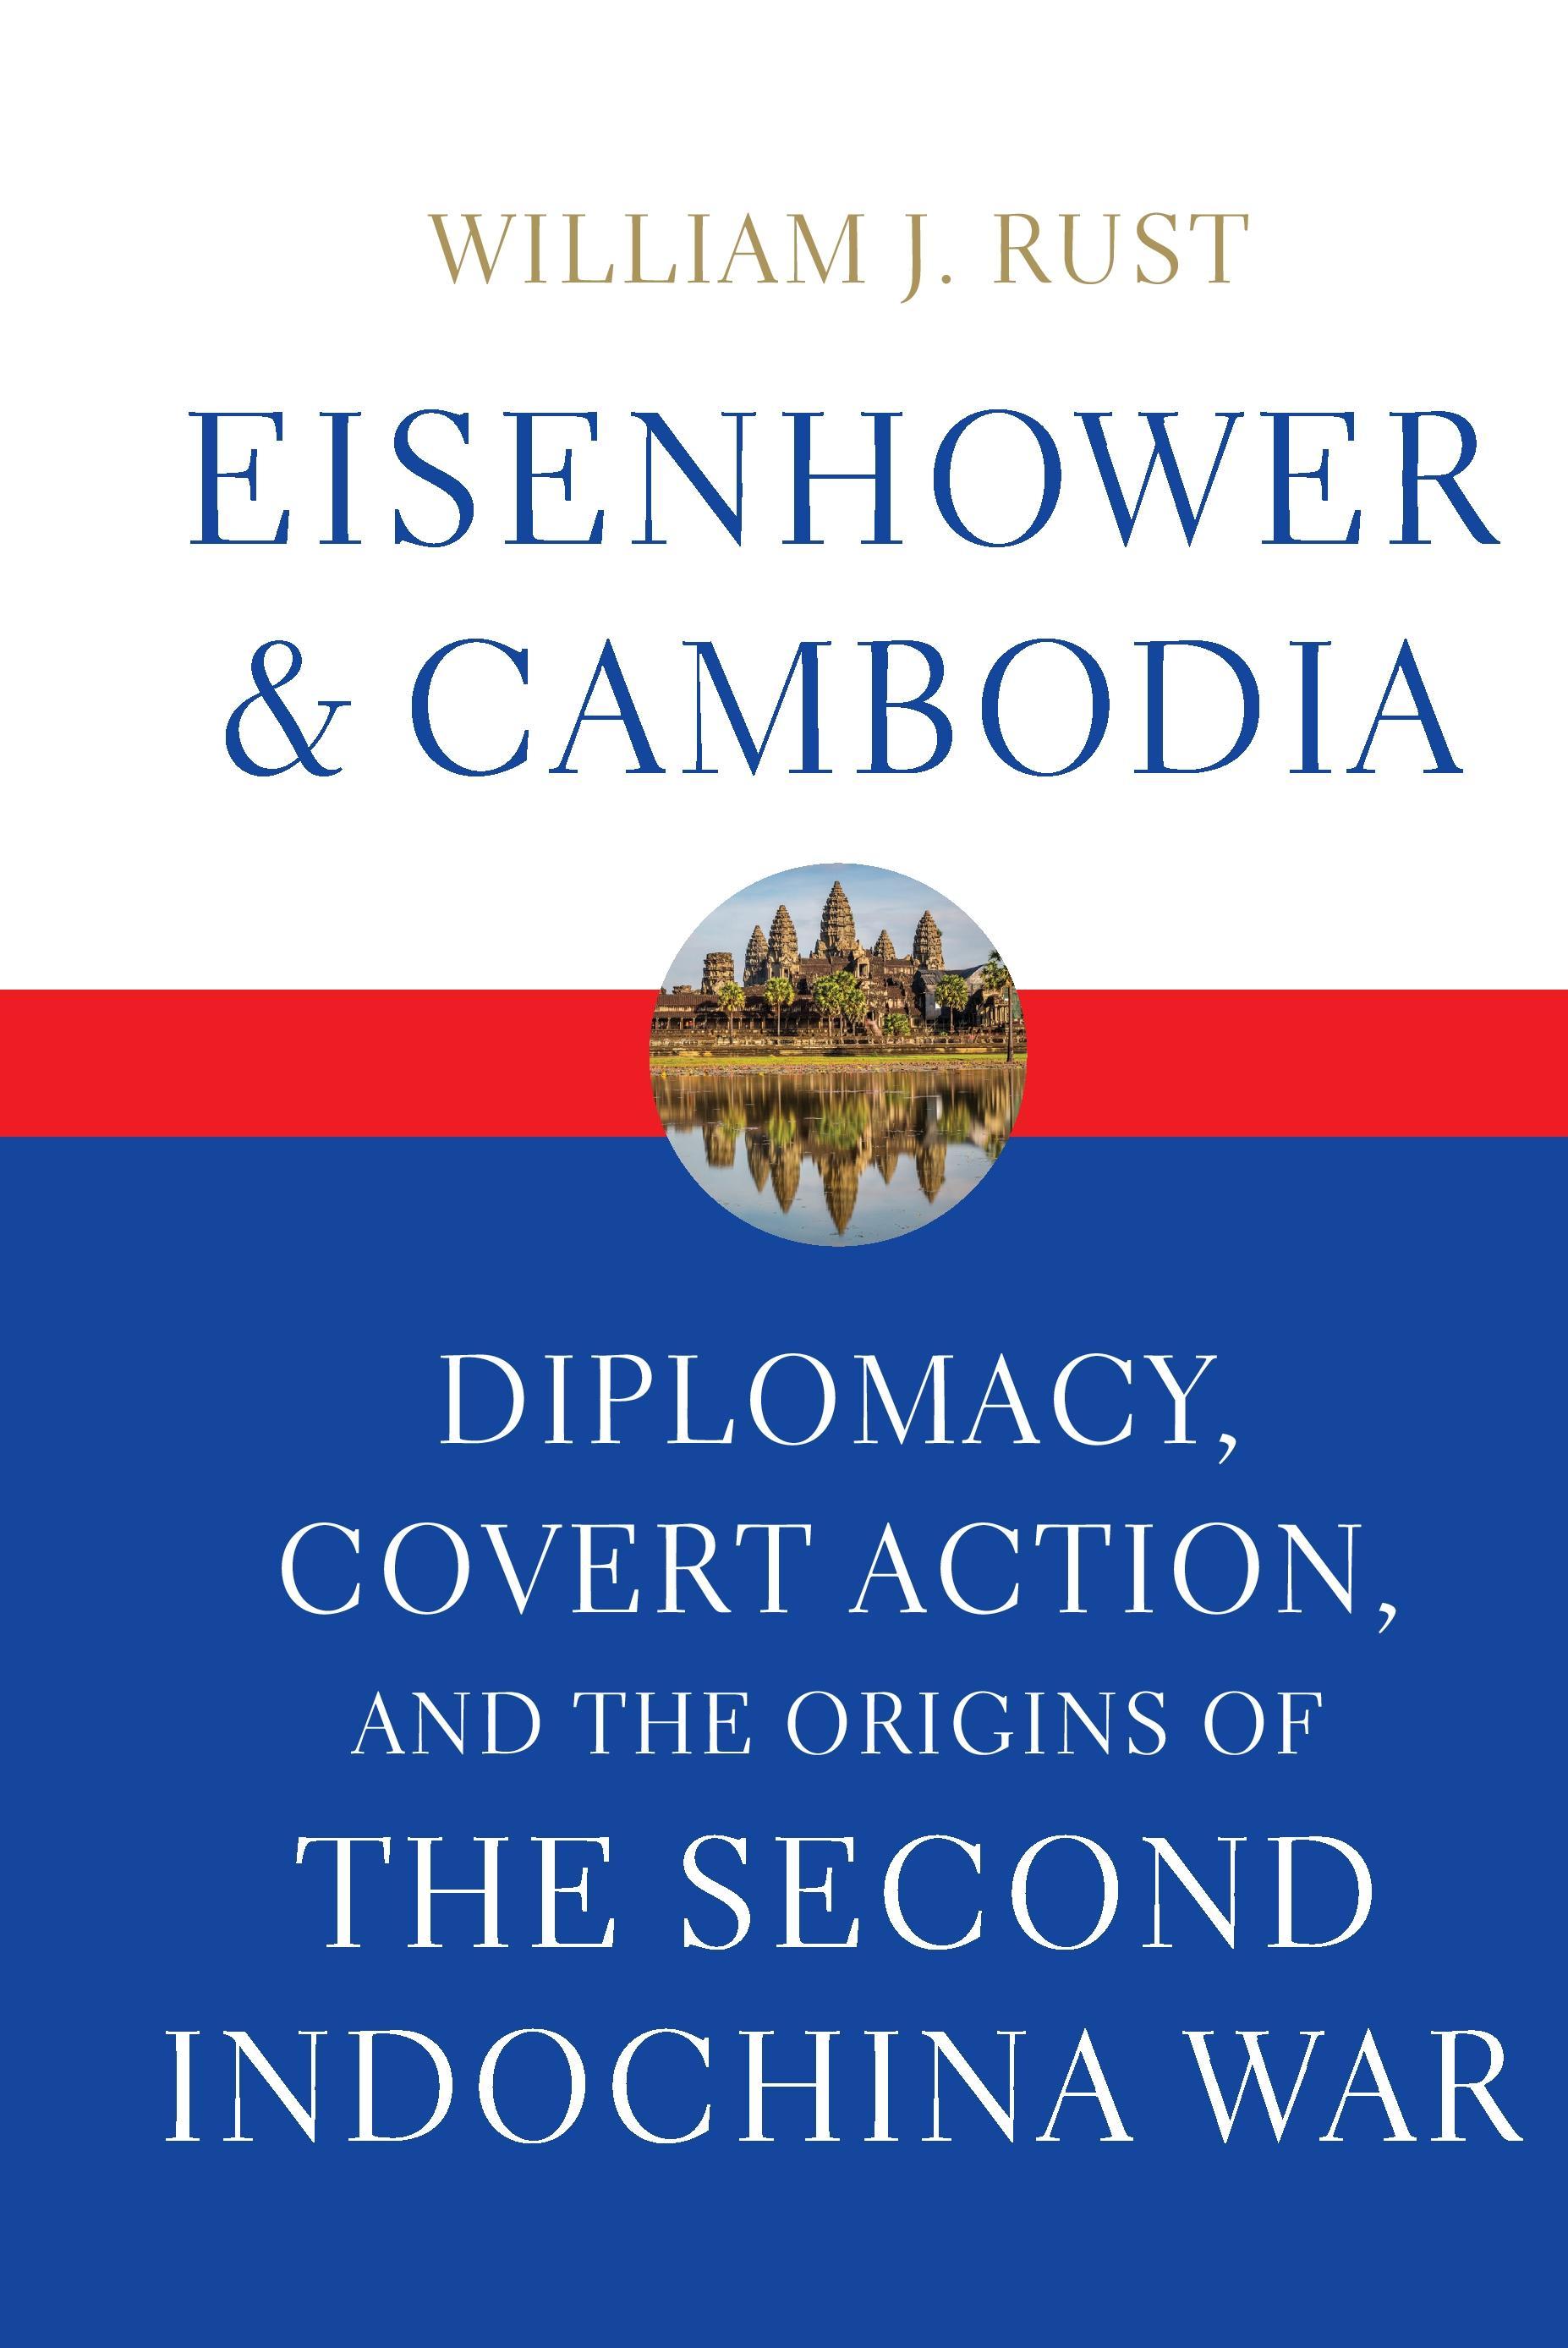 Eisenhower and Cambodia: Diplomacy, Covert Action, and the Origins of the Second Indochina War / William J. Rust / Buch / Studies in Conflict, Diplomacy / Englisch / 2016 / UNIV PR OF KENTUCKY - Rust, William J.